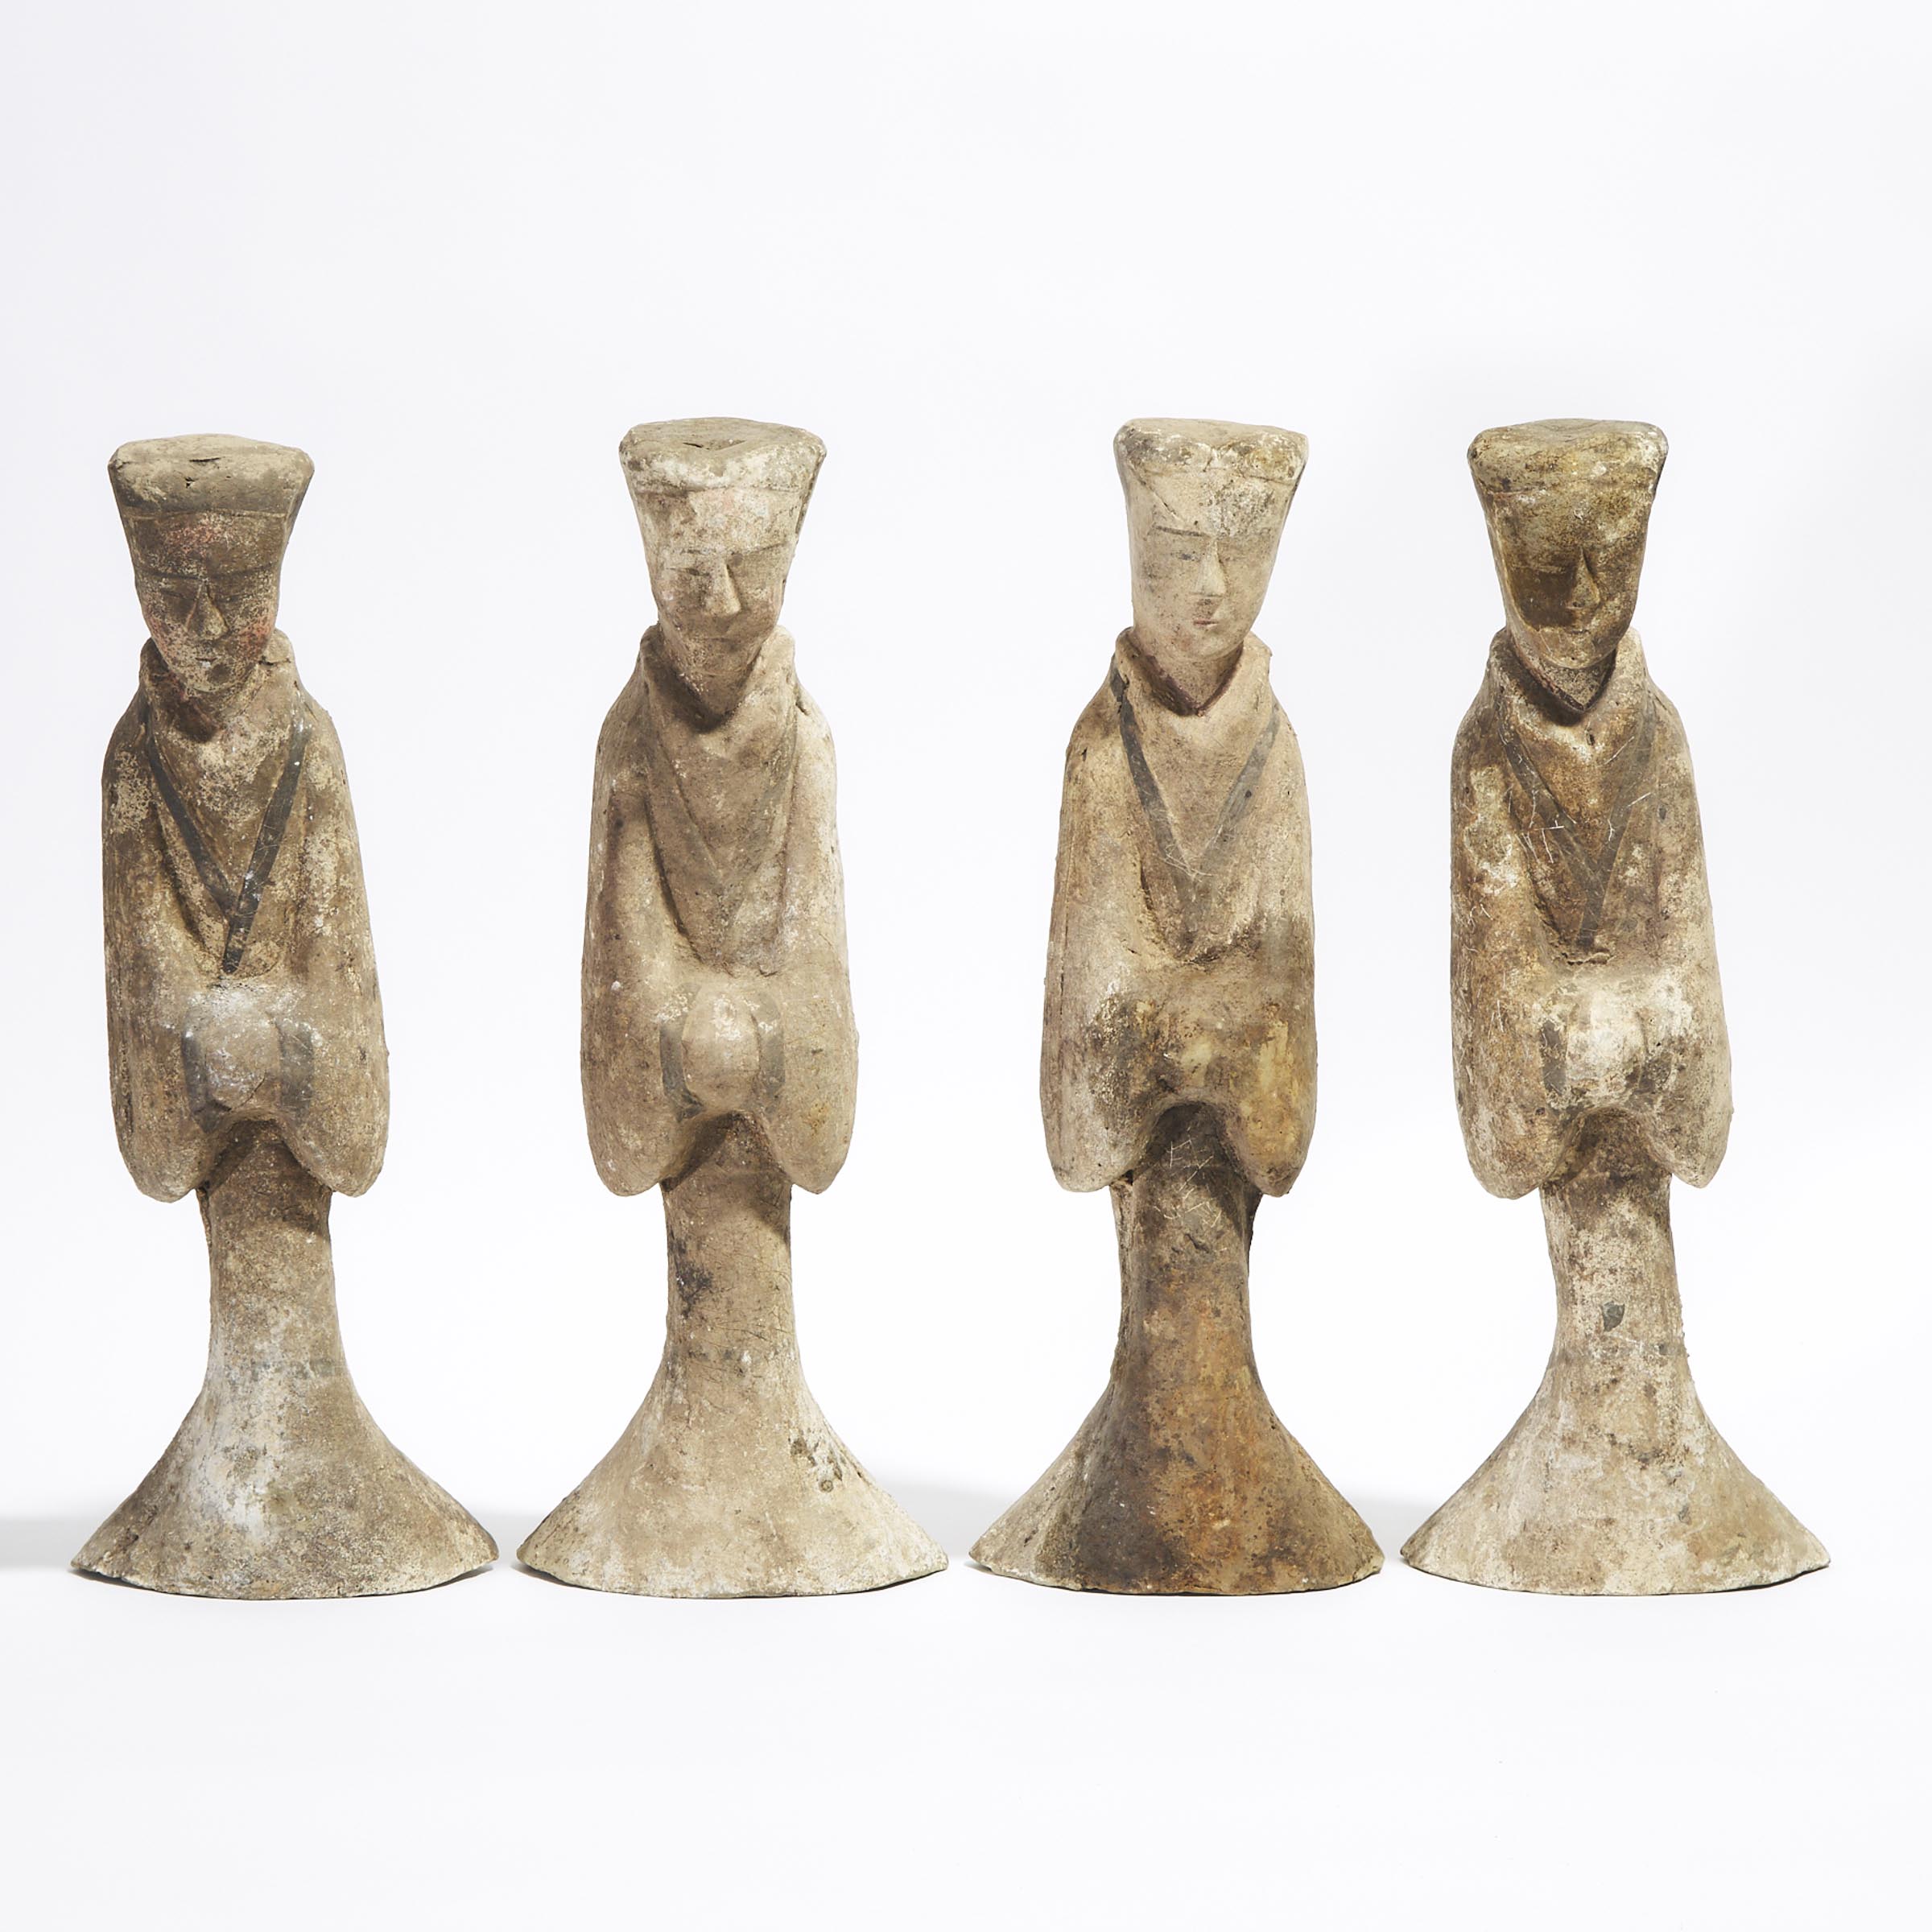 A Group of Four Large Painted Pottery Figures of Attendants, Han Dynasty (206 BC - AD 220)